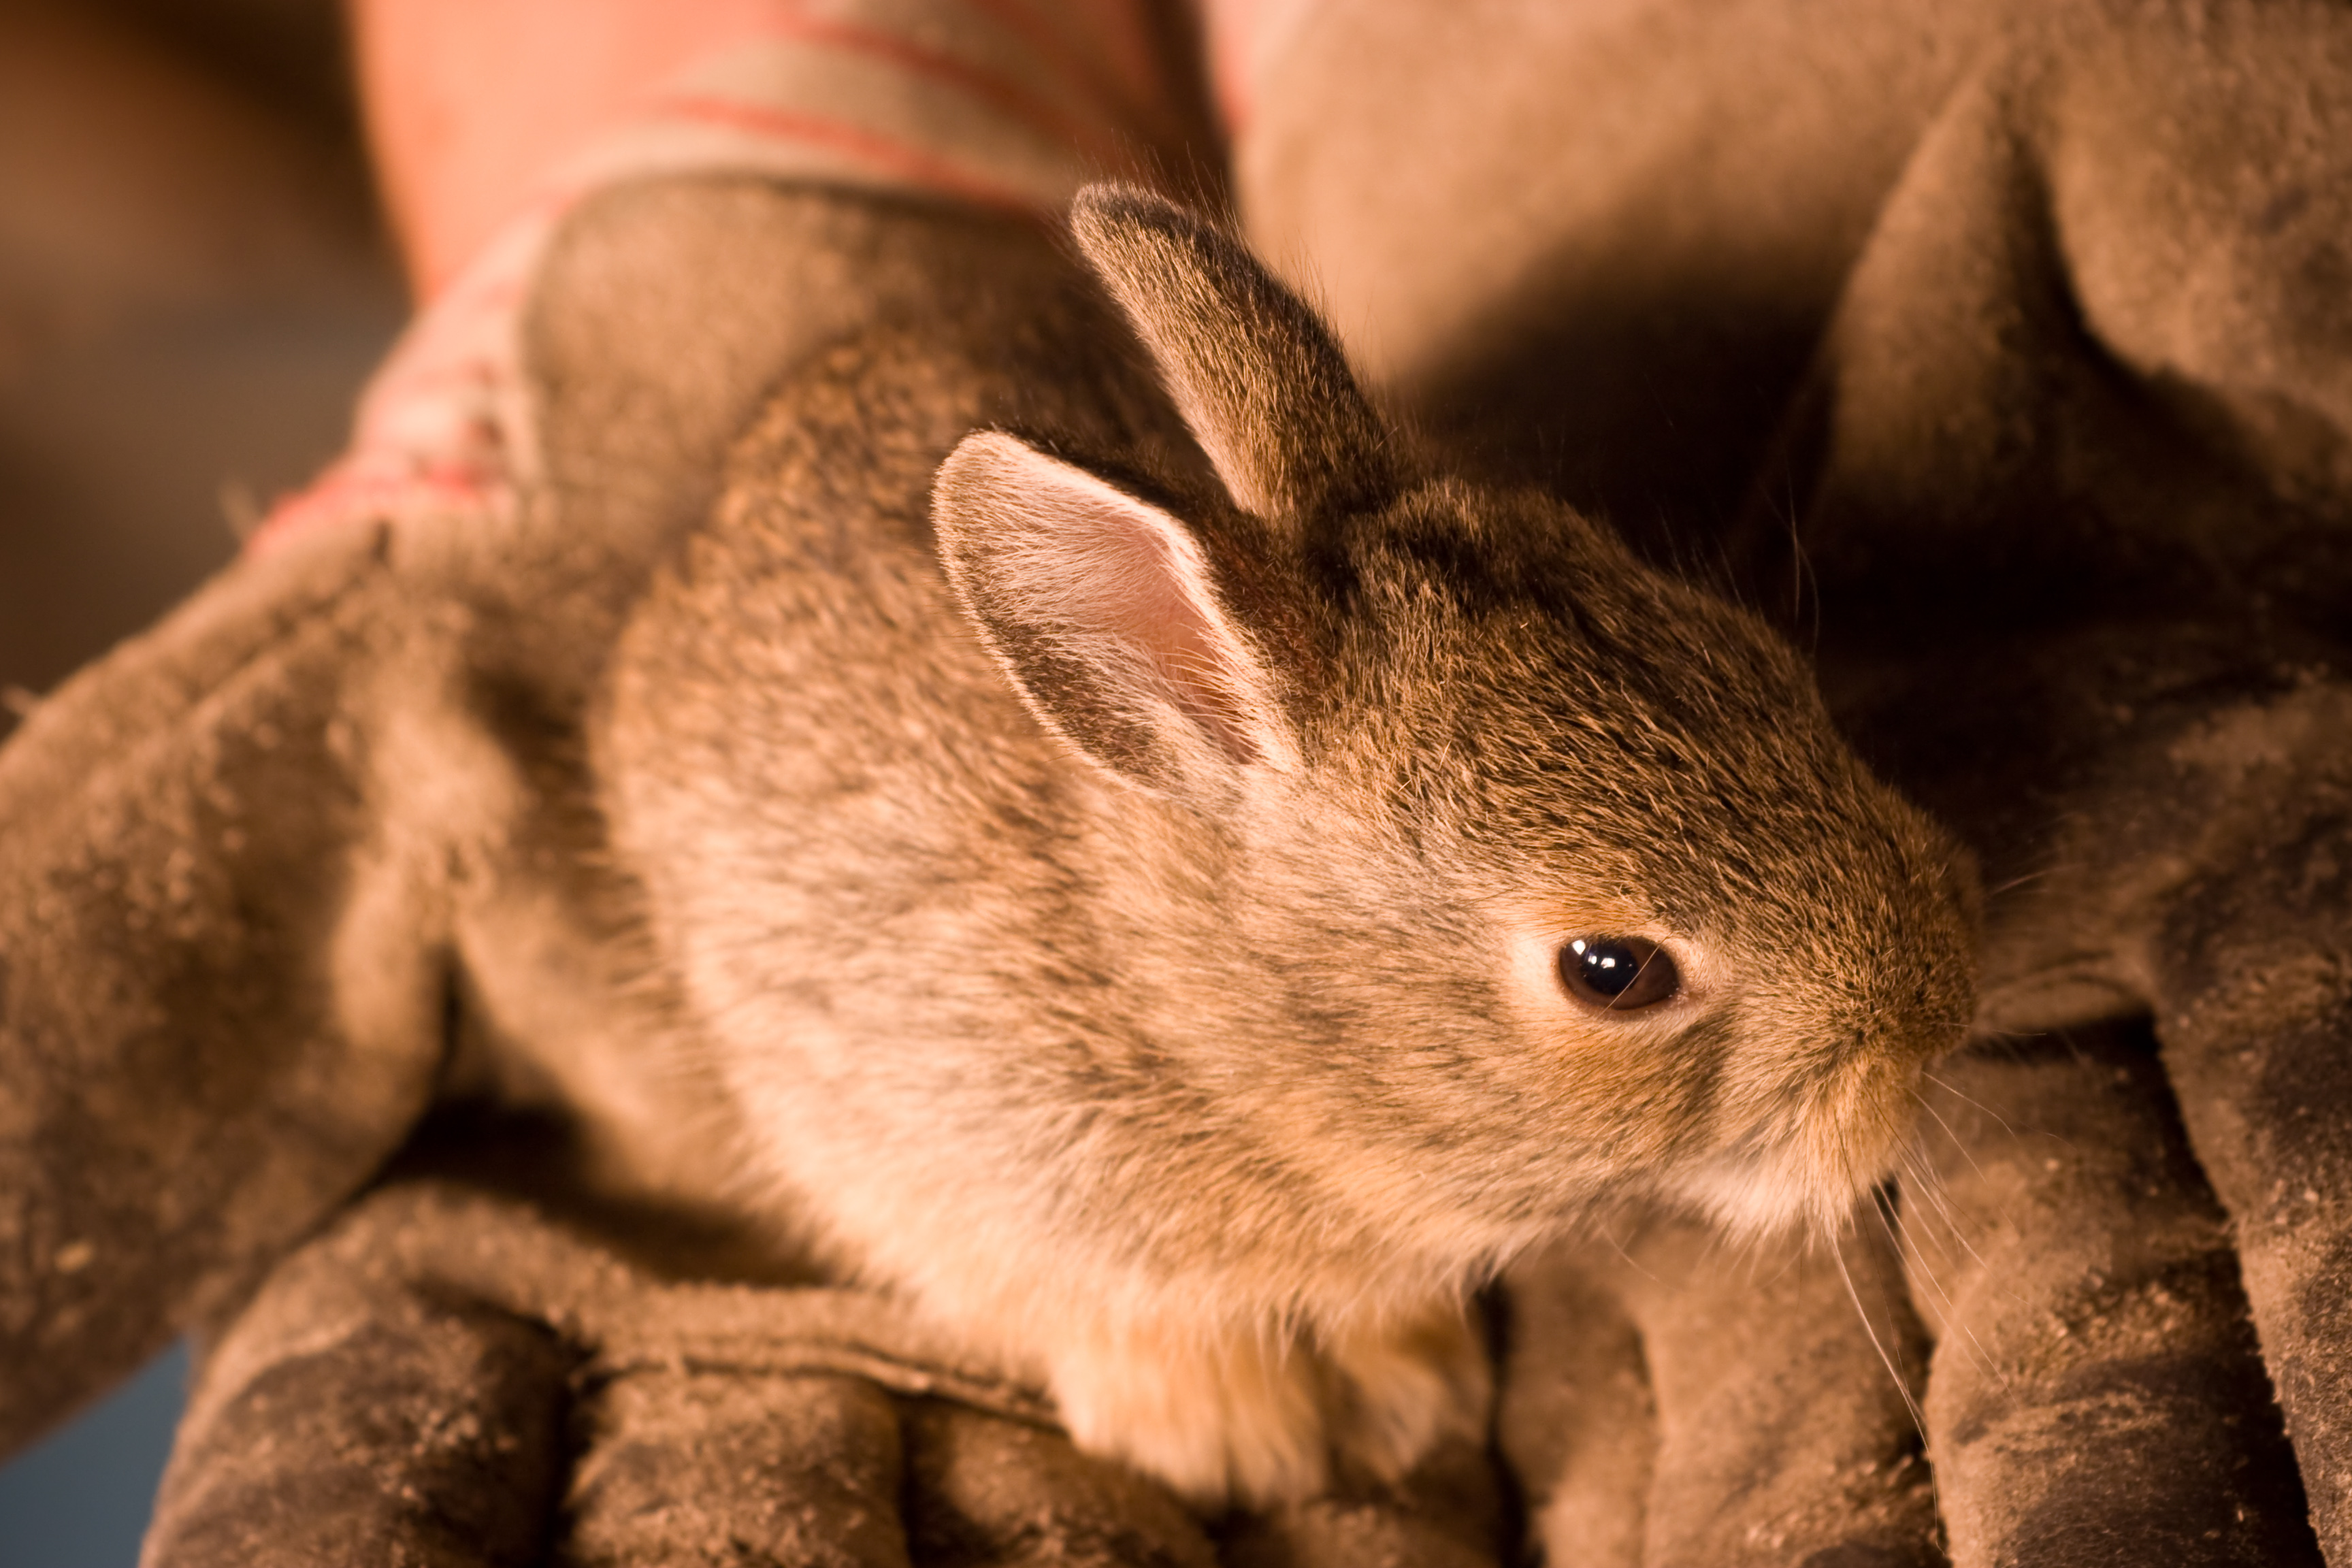 Little bunny in hands, Animal, Arm, Bunny, Close, HQ Photo